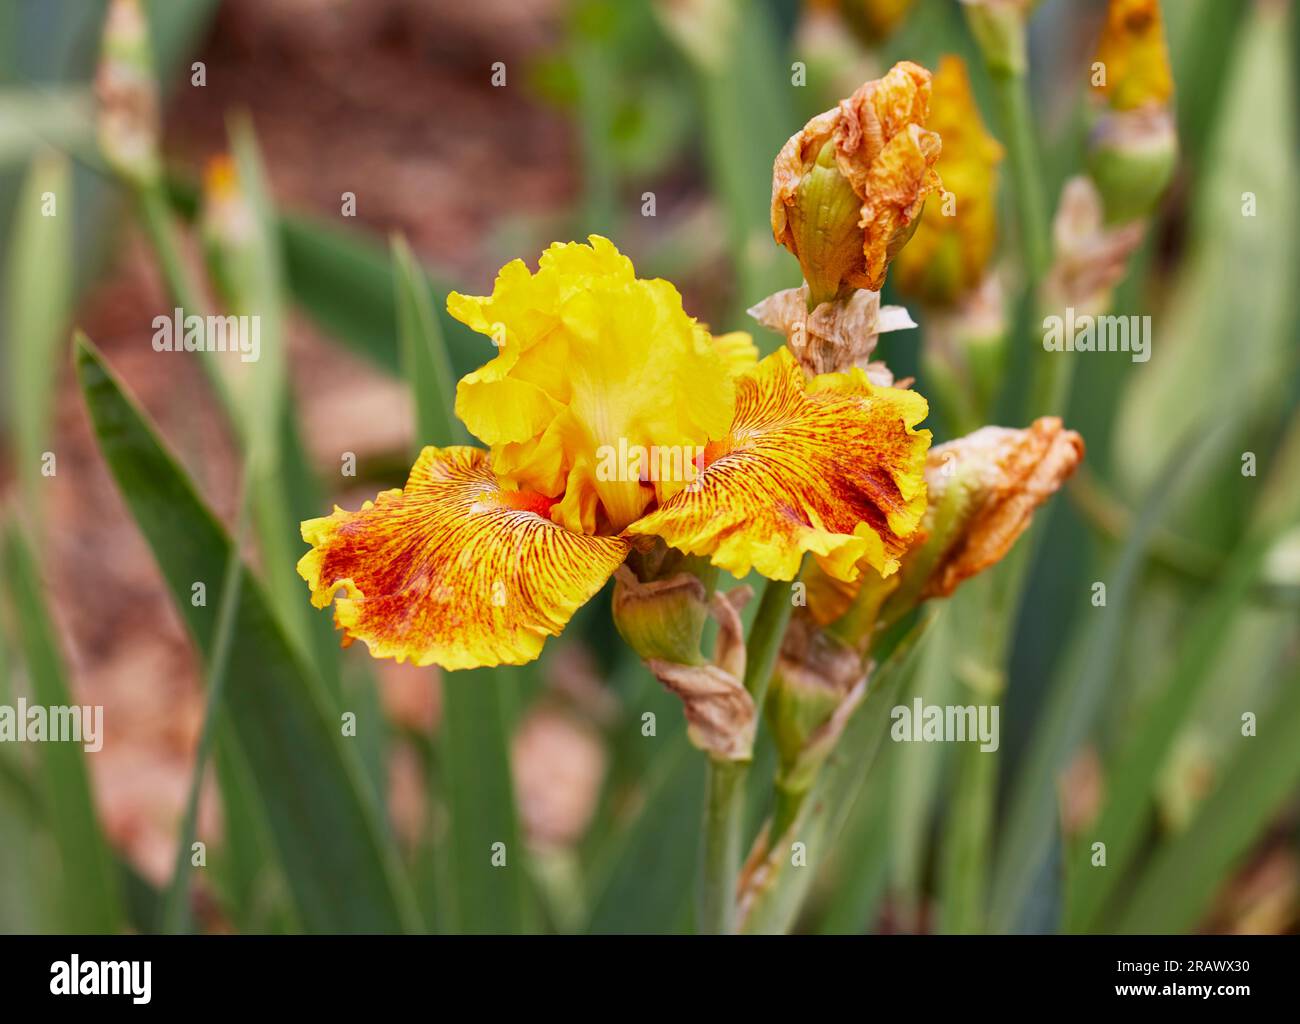 Close up of a Calizona Gold Iris Flower and Buds with Shallow depth of Field Stock Photo